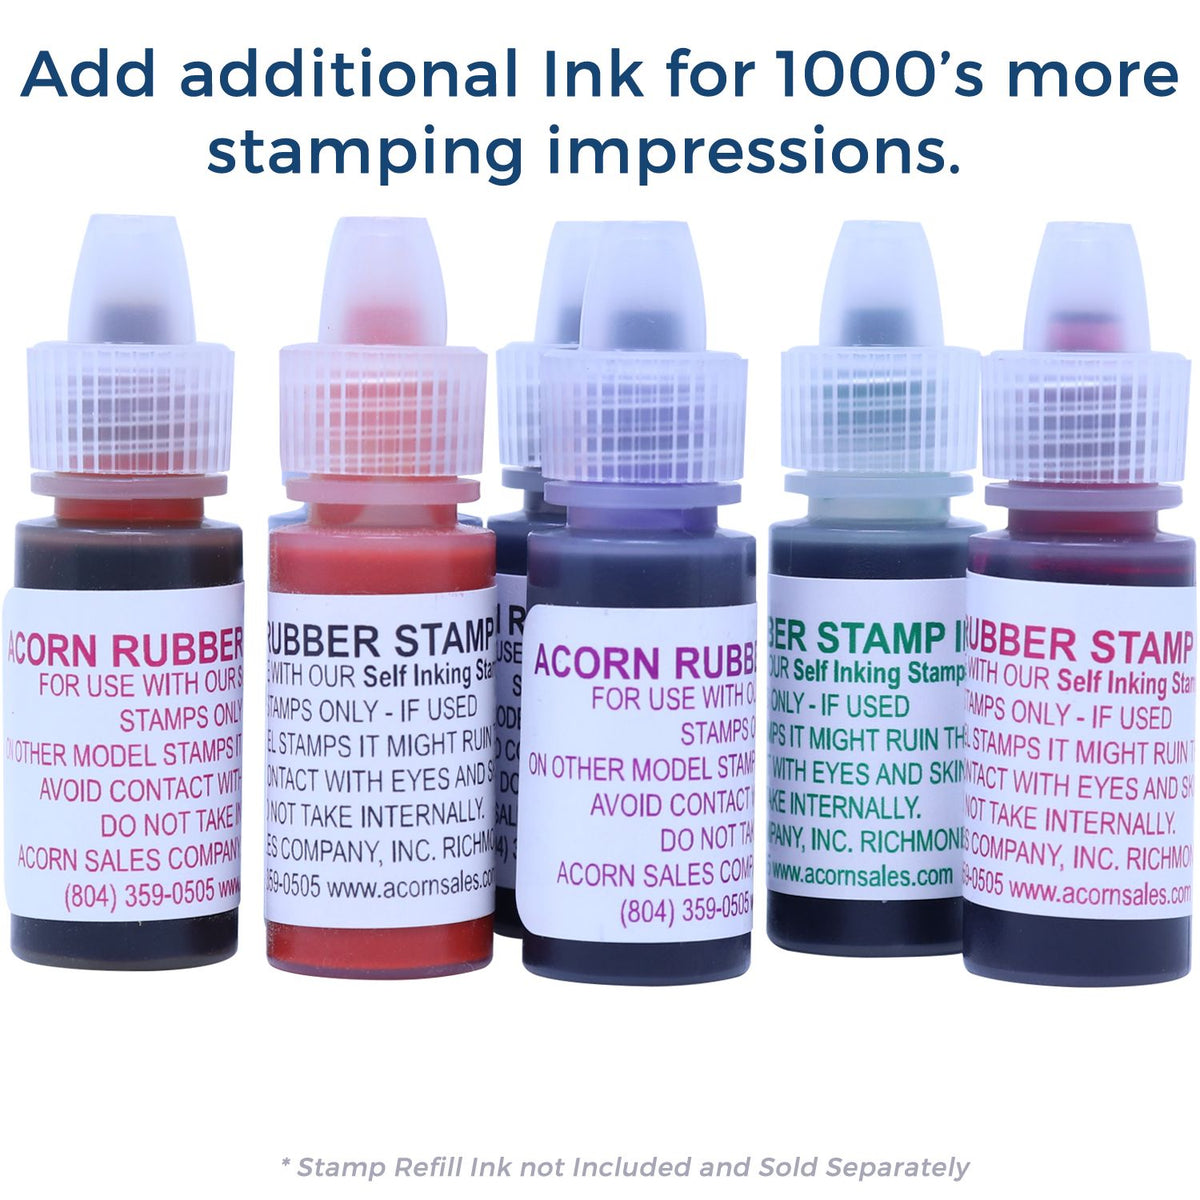 Refill Ink for Self-Inking Round Shocked Smiley Stamp Available